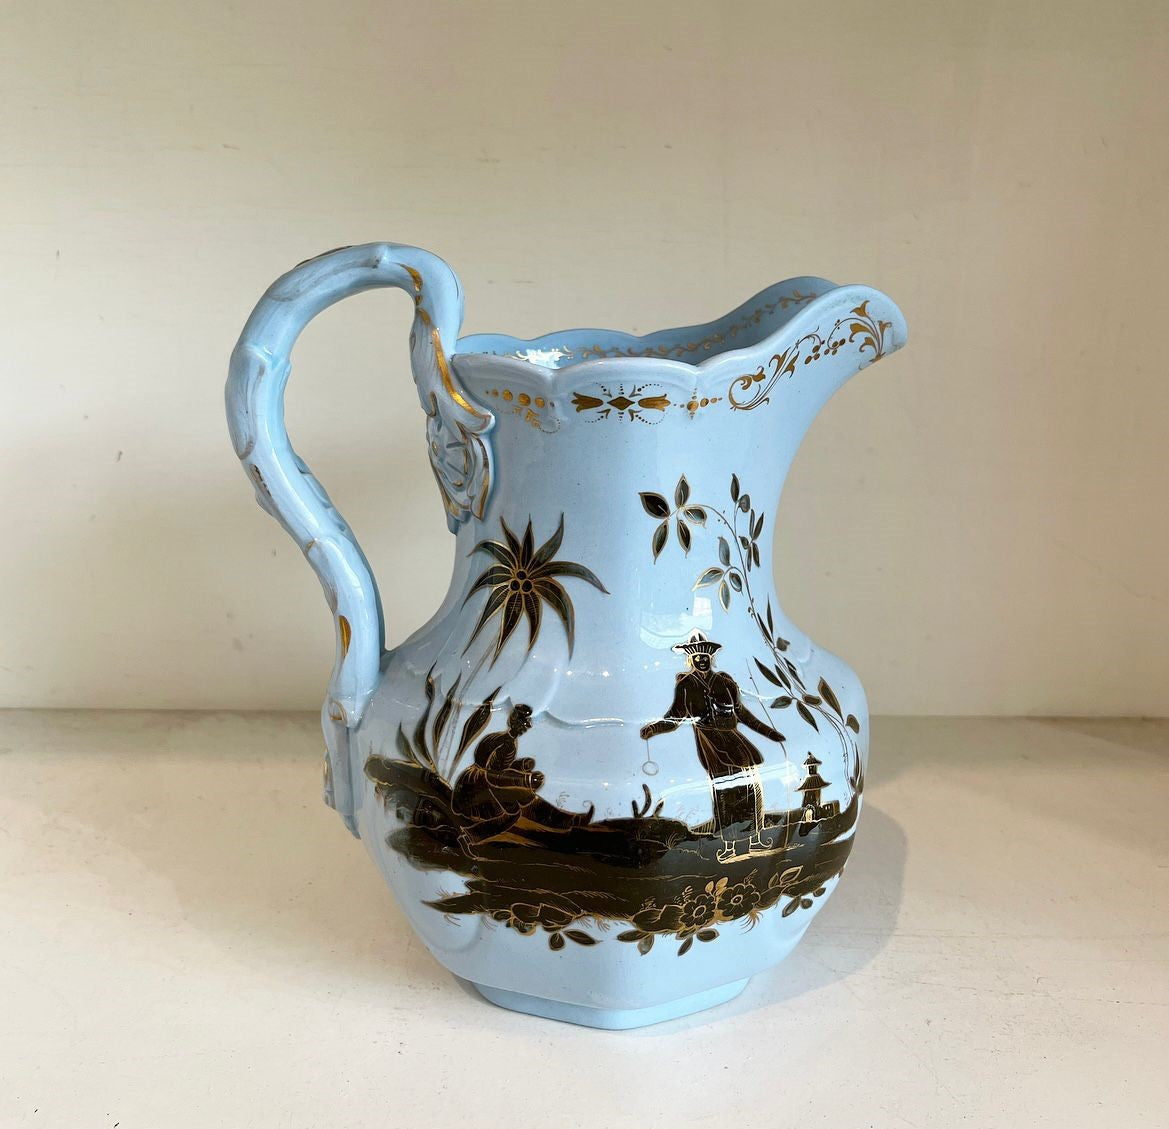 A Rare Pale Blue Stoneware Pitcher Jug with Gilt Enriched Black Enamel with Chinoiserie Figures by William Ridgway